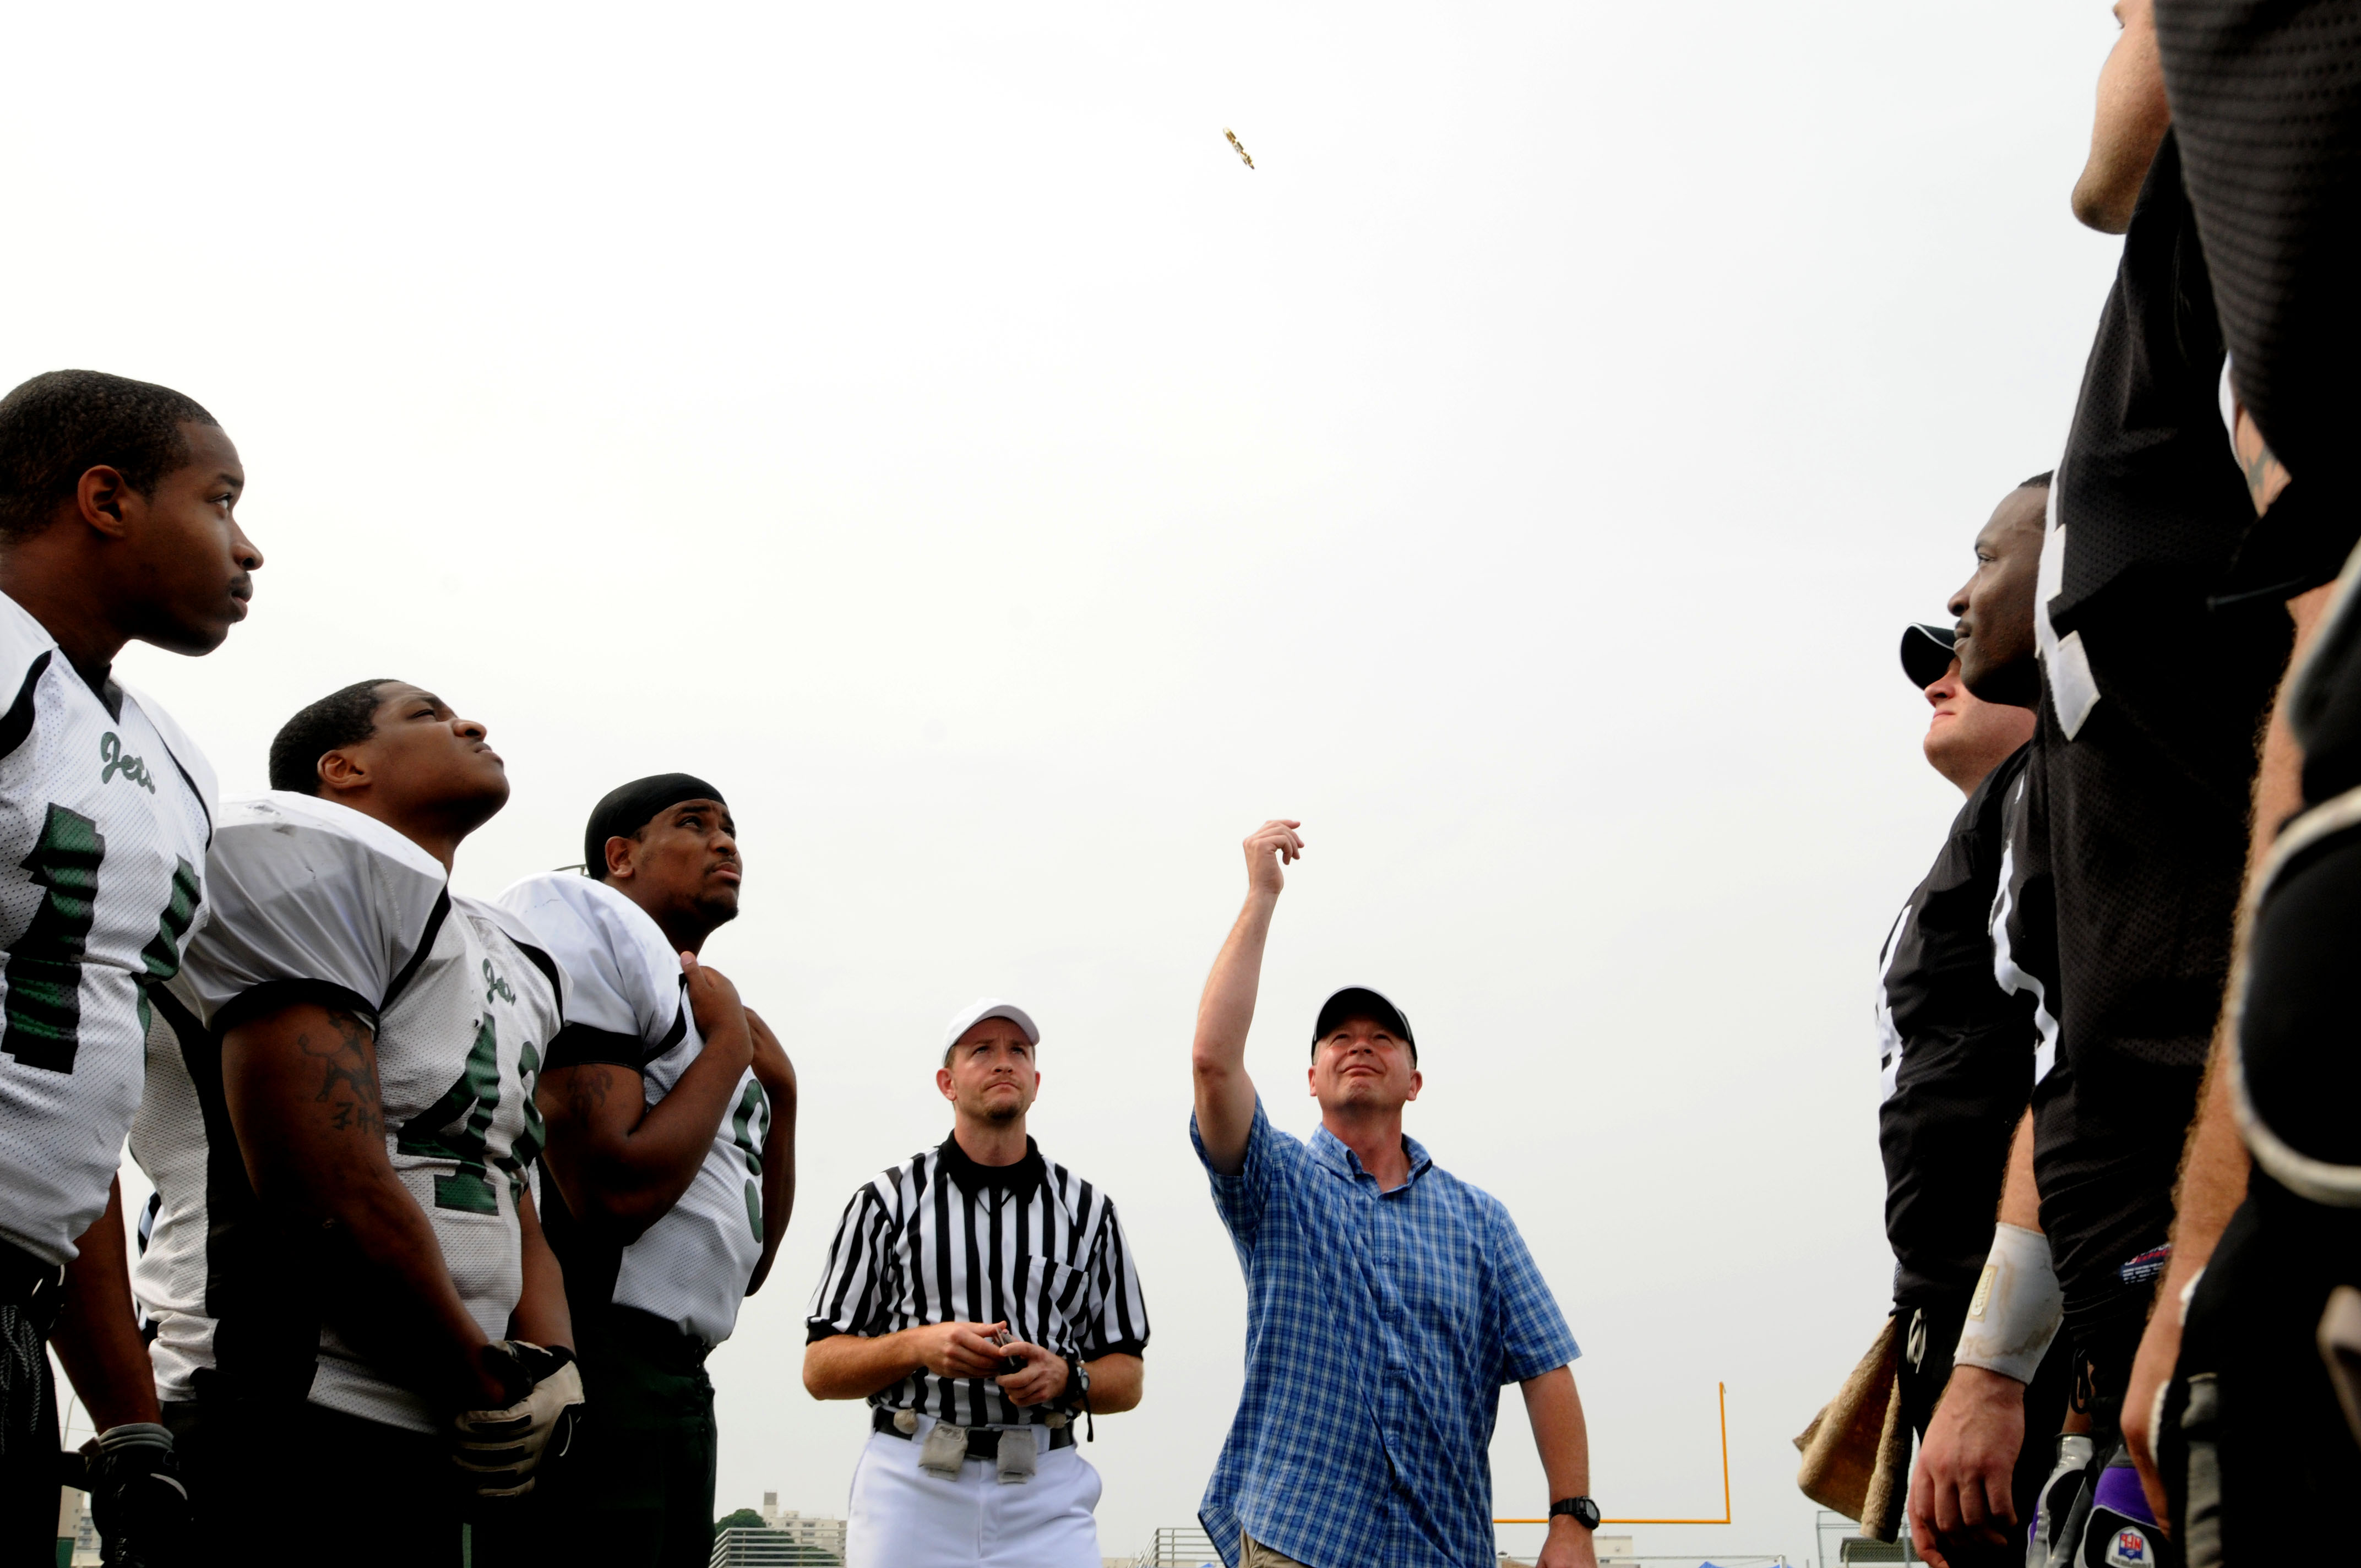 US Navy 090704-N-9818V-494 Master Chief Petty Officer of the Navy (MCPON) Rick West tosses the coin for the Yokosuka Seahawks and Misawa Jets